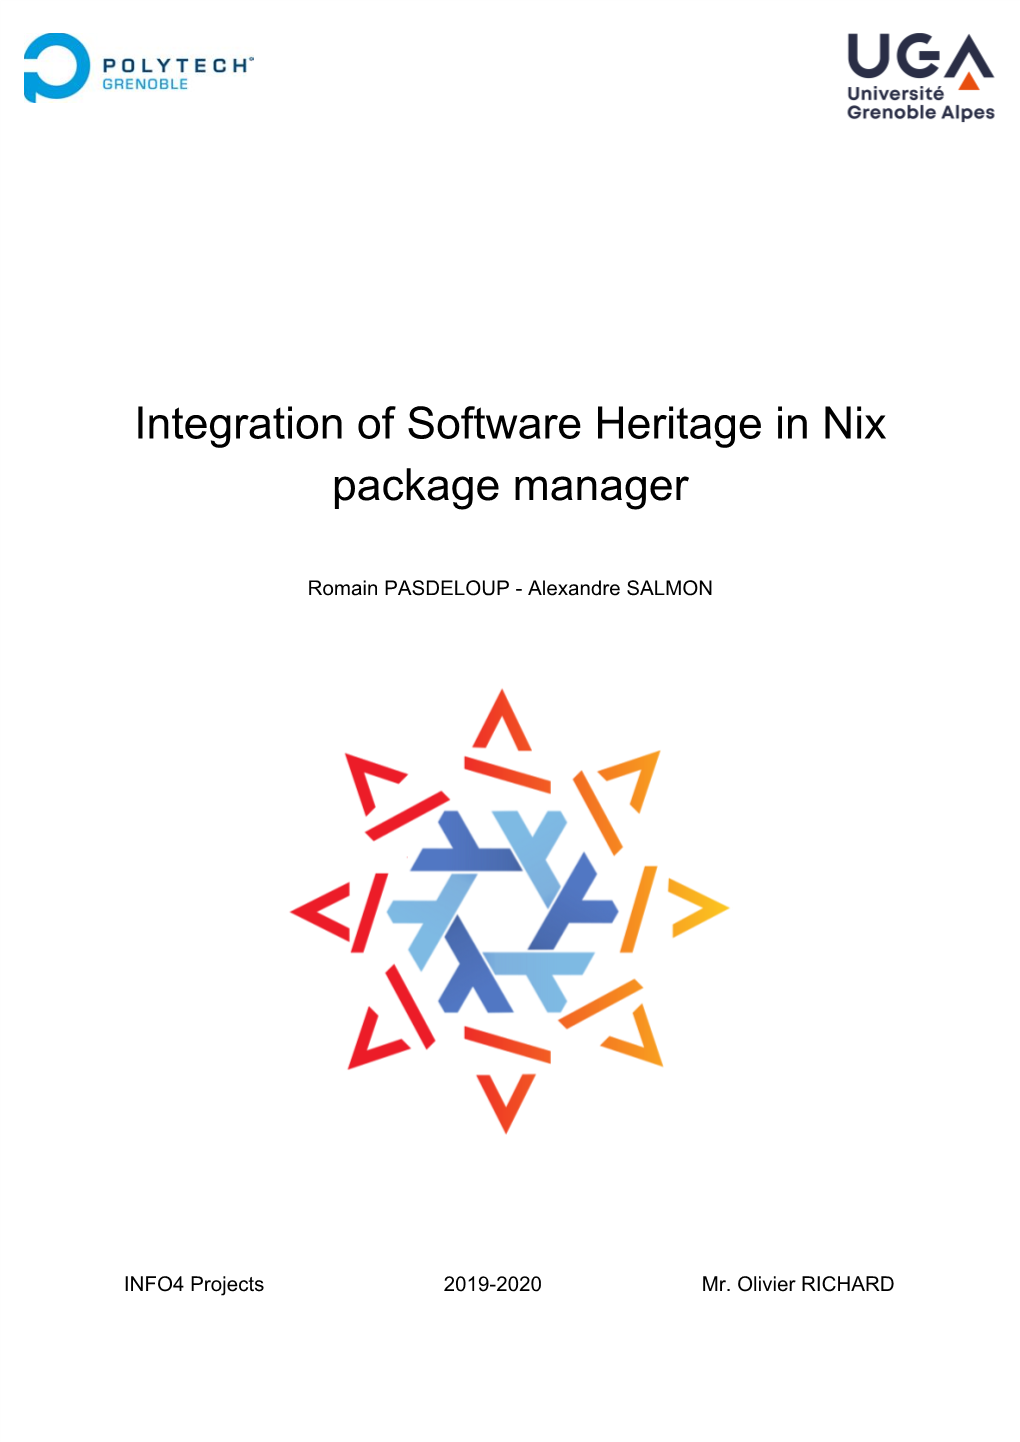 Integration of Software Heritage in Nix Package Manager